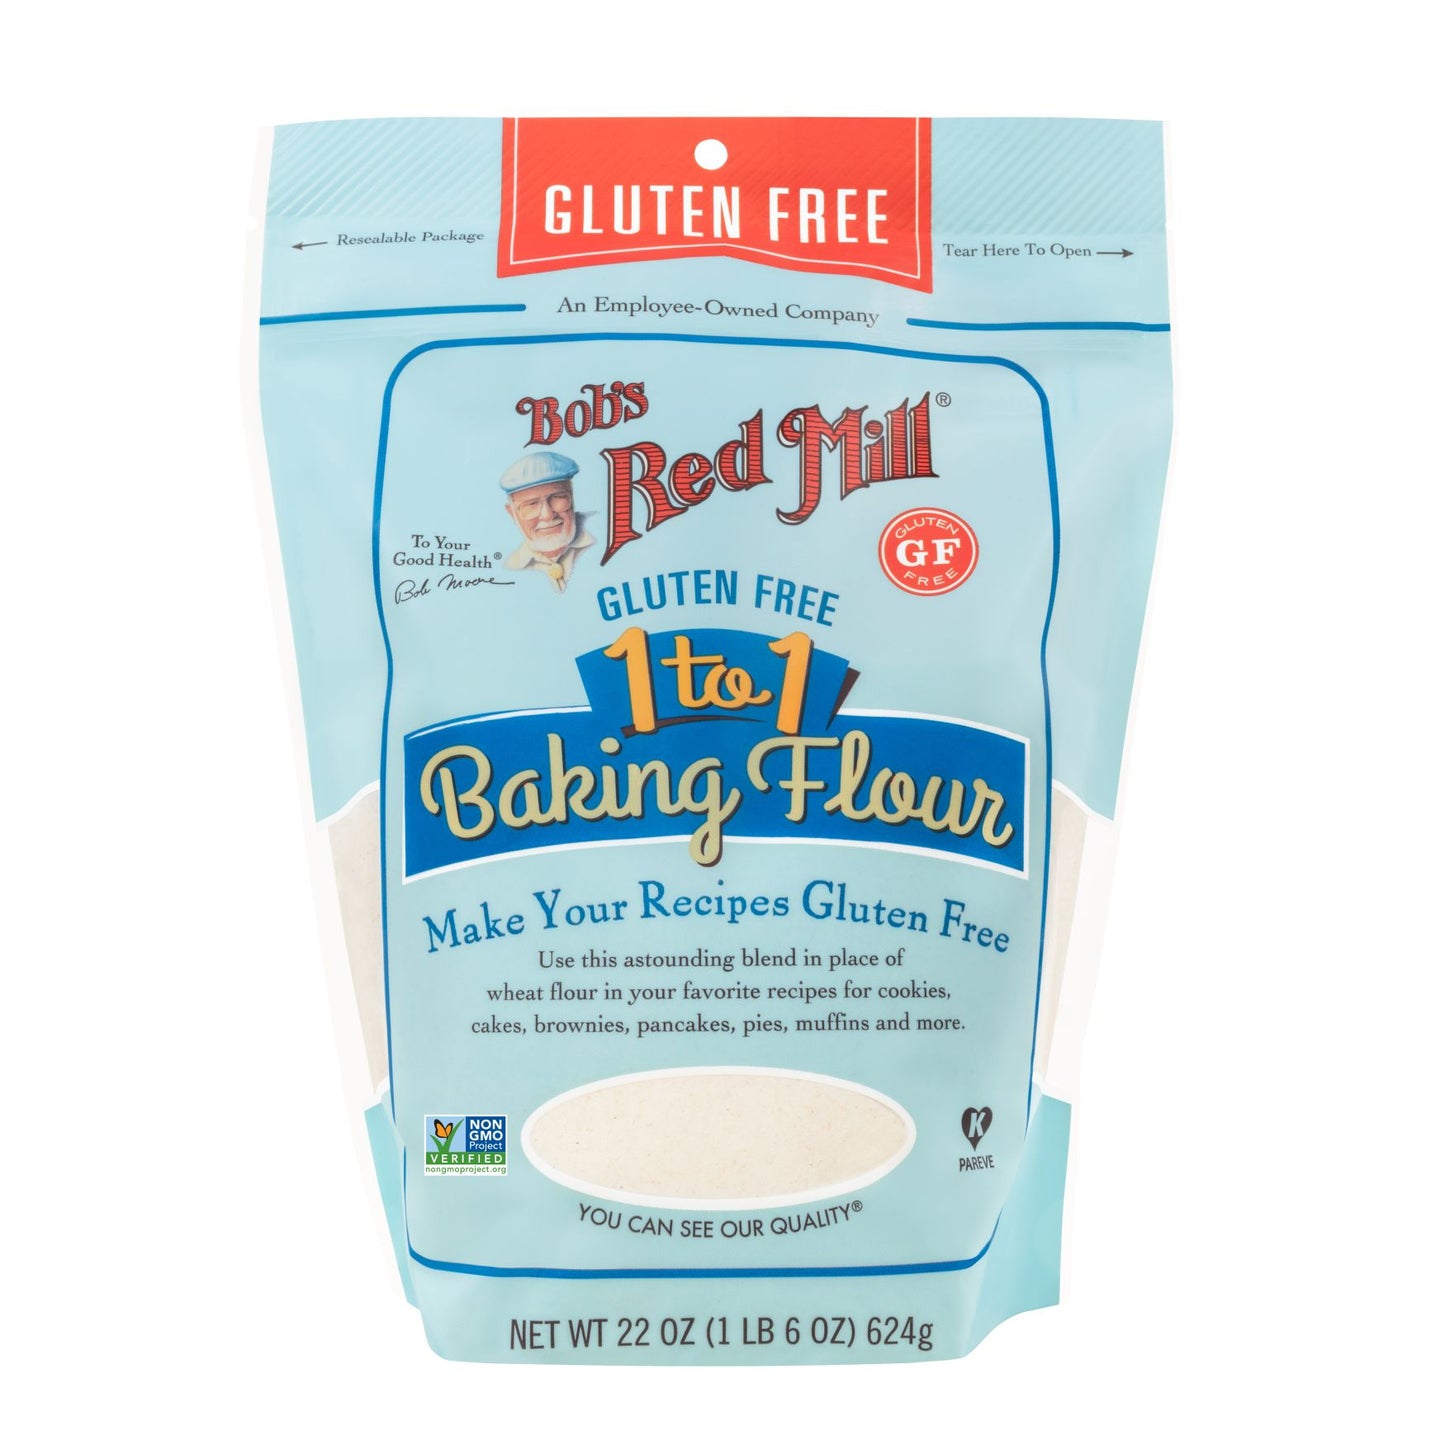 Bob's Red Mill 1 to 1 Baking Flour 623g Or 1.24Kg Gluten Free